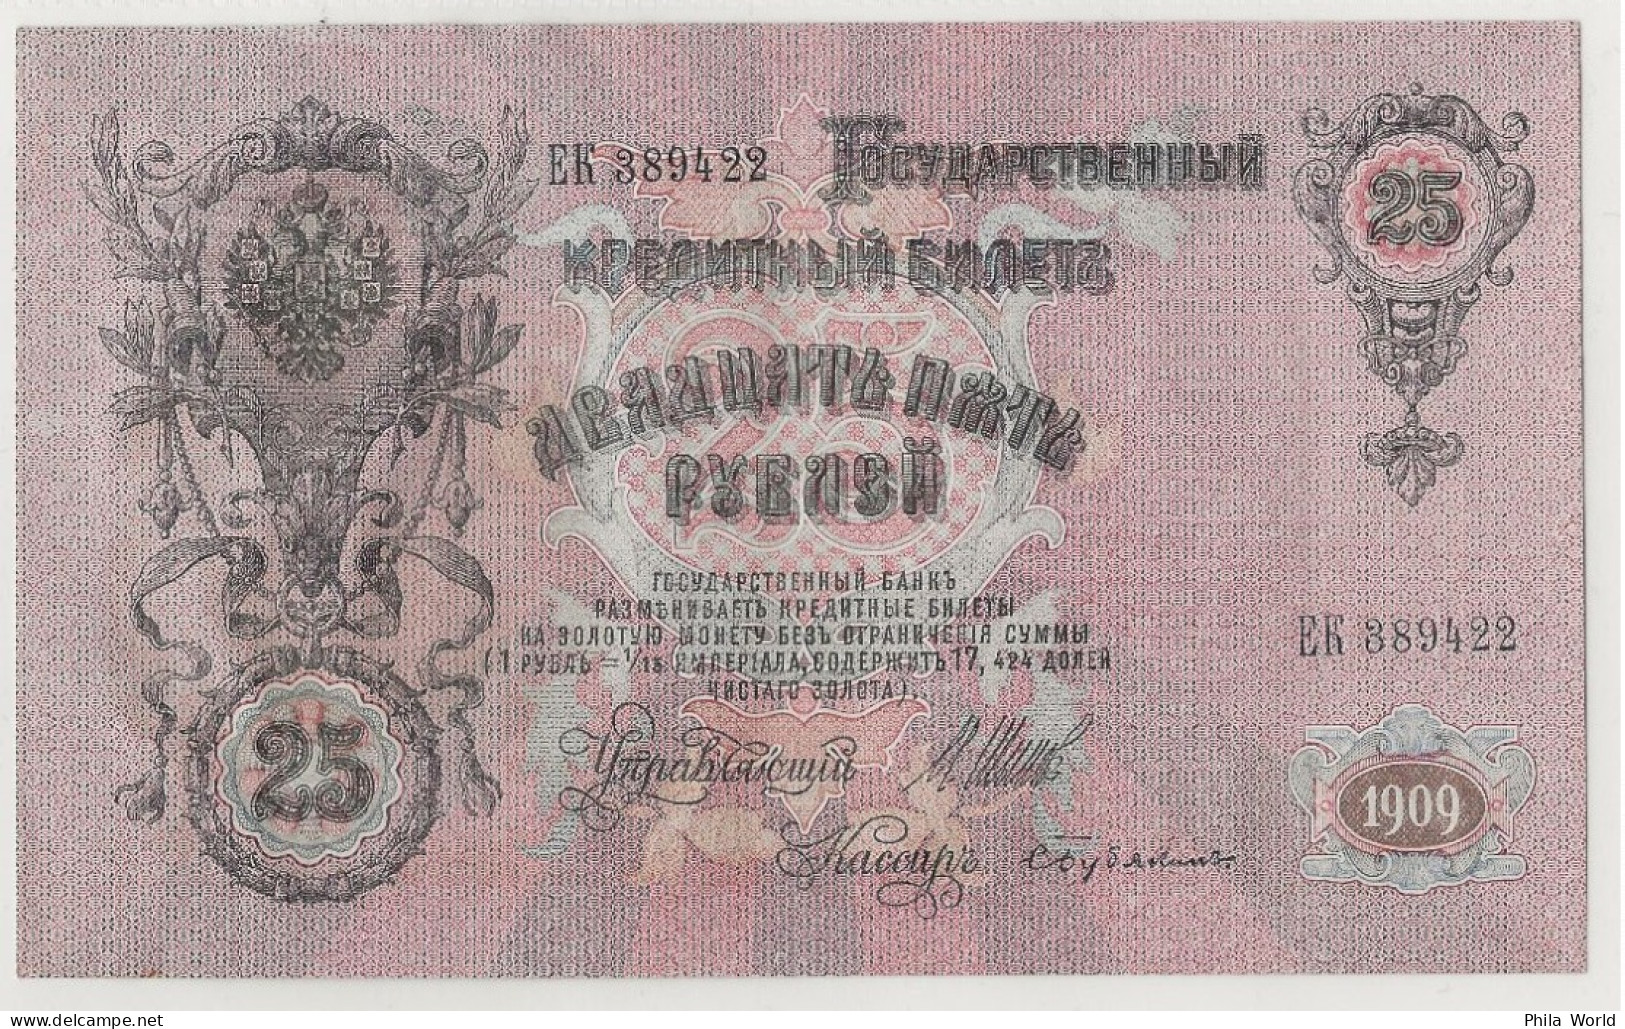 RUSSIE RUSSIA 25 ROUBLES Rubles Russian 1909 Billet Banque Bank Note Banknote Alexandre Alexander III Shipov Gusev - Russia